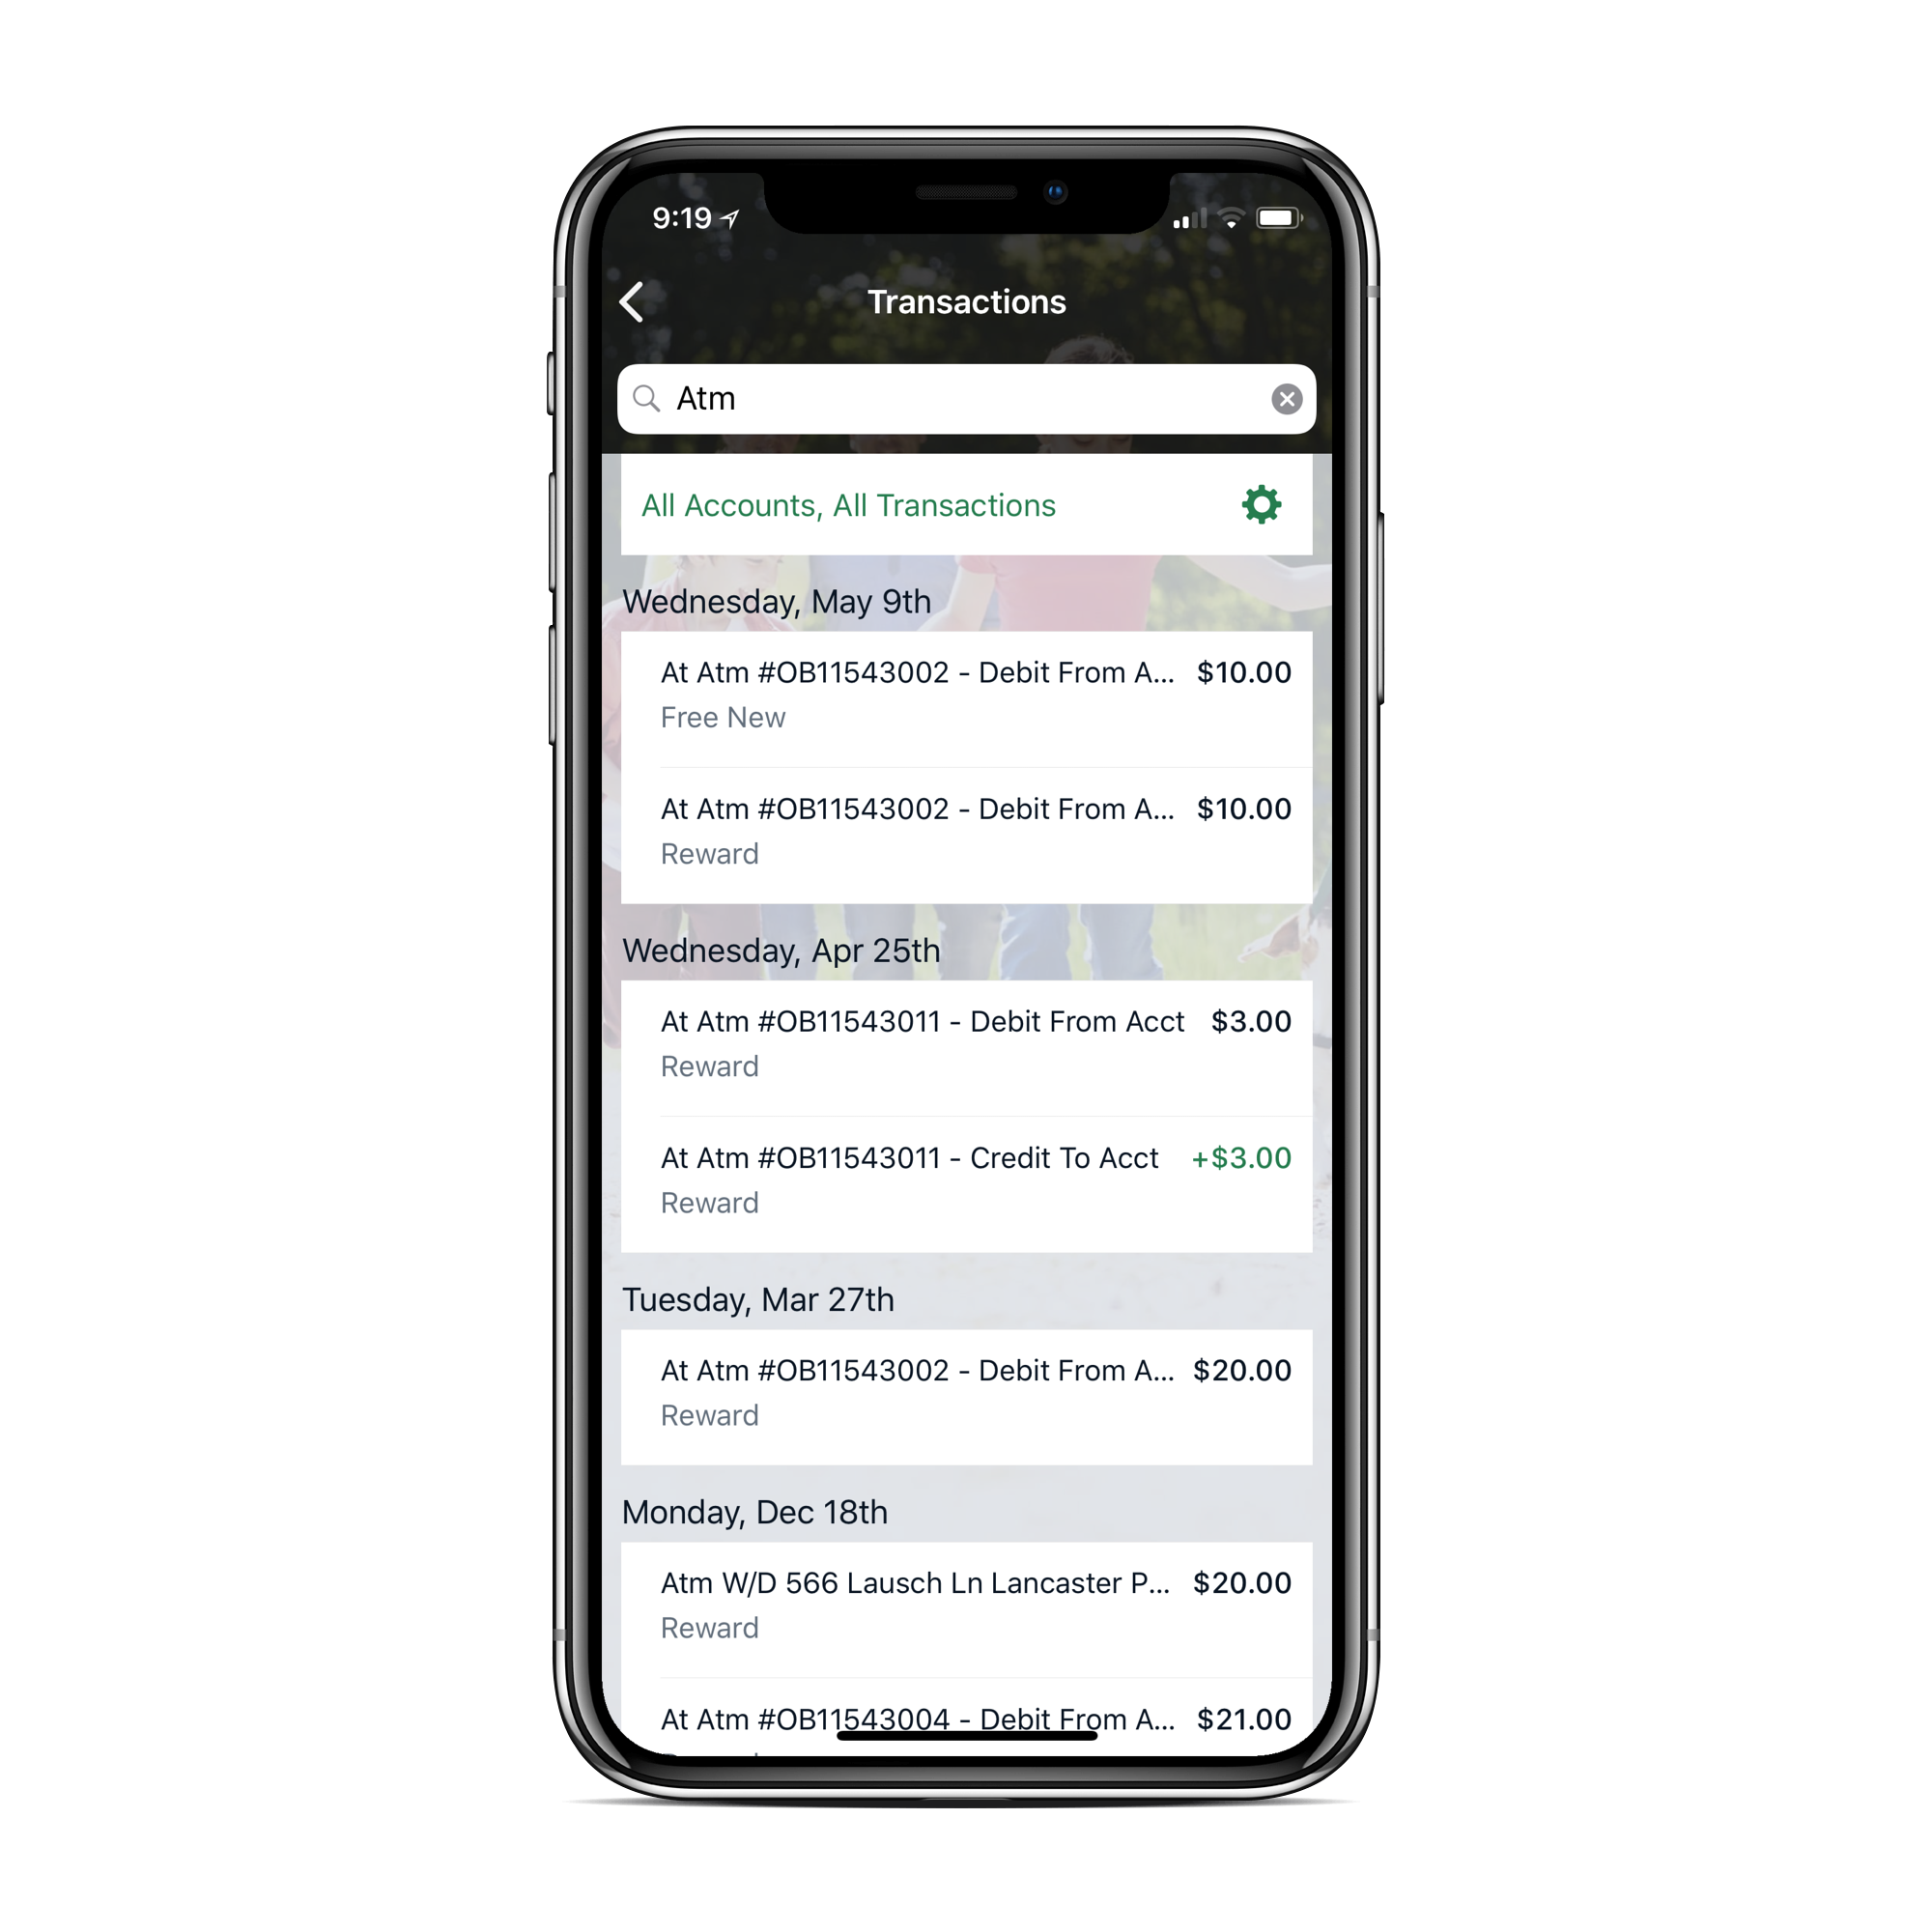 Orrstown Bank mobile banking app transactions screen with search function on space grey iPhone X